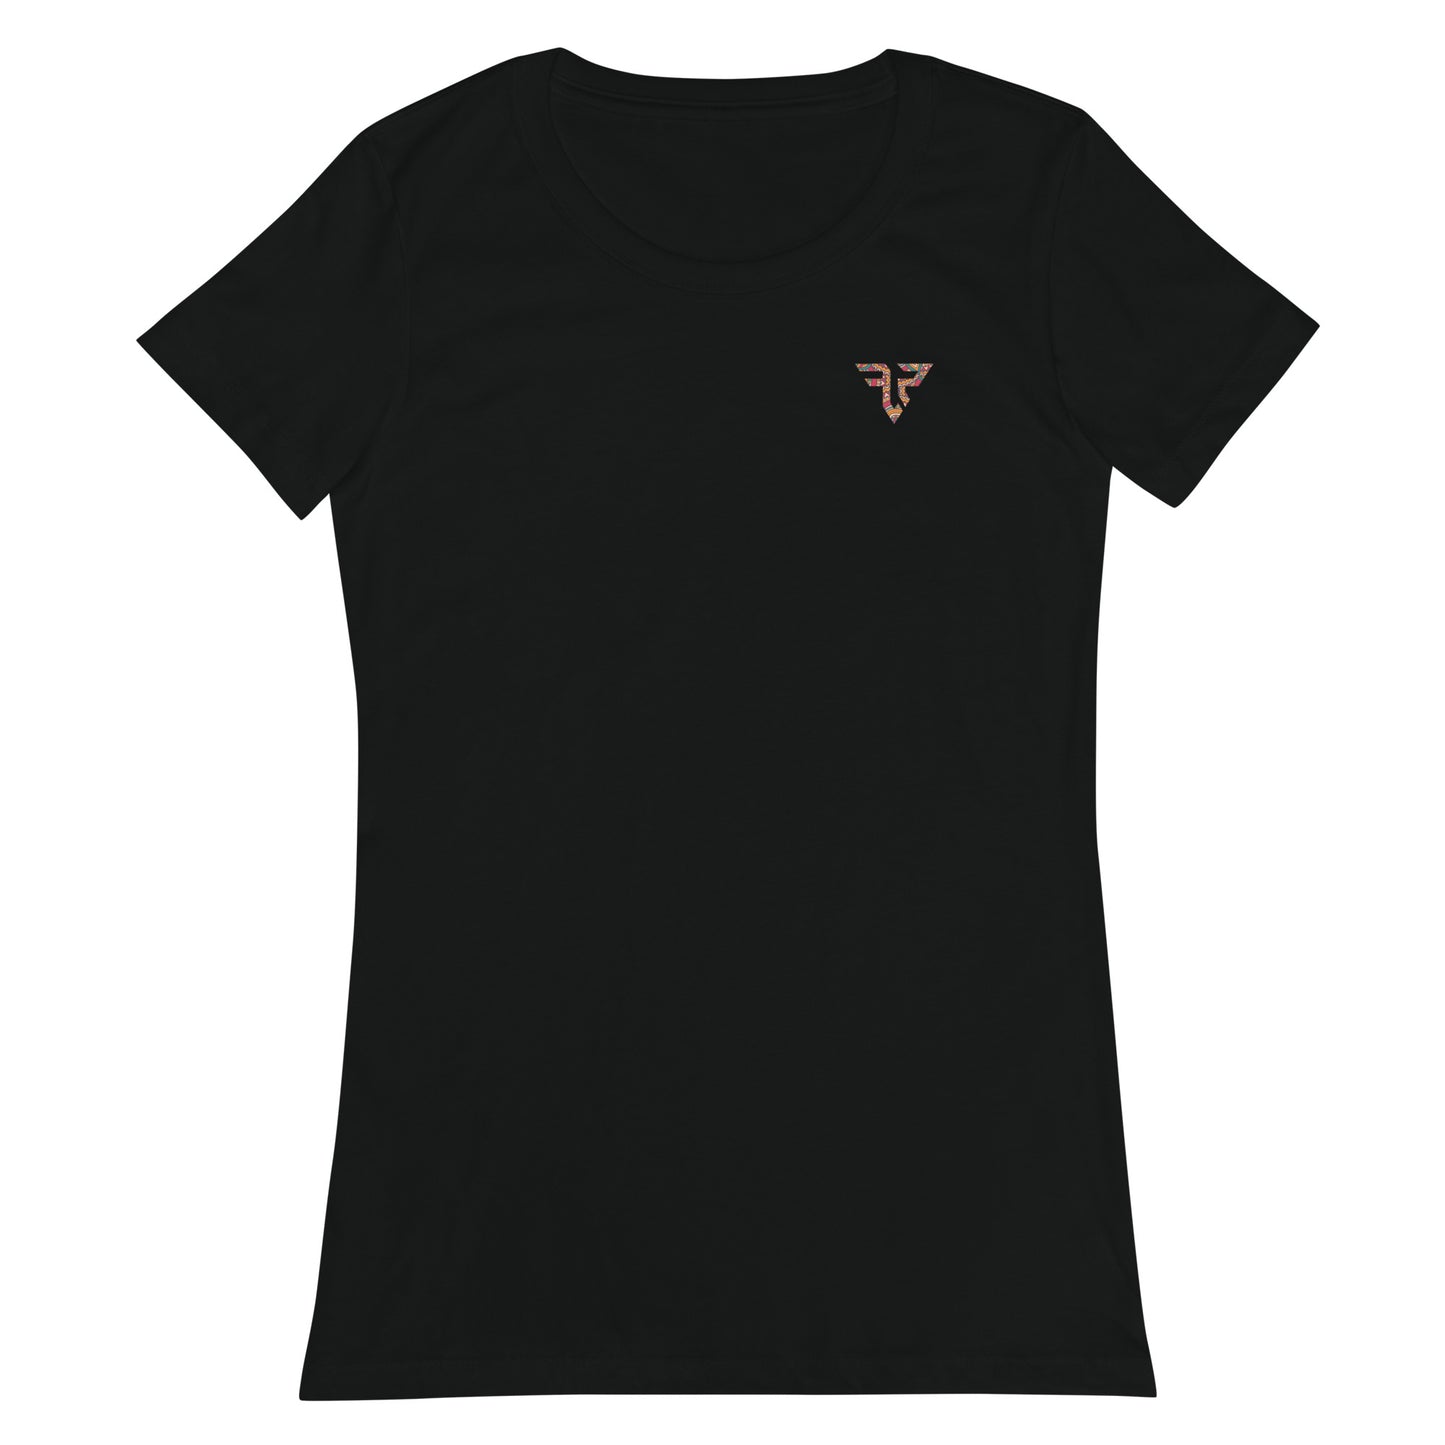 FTR Hope: Women's Special Edition Tee